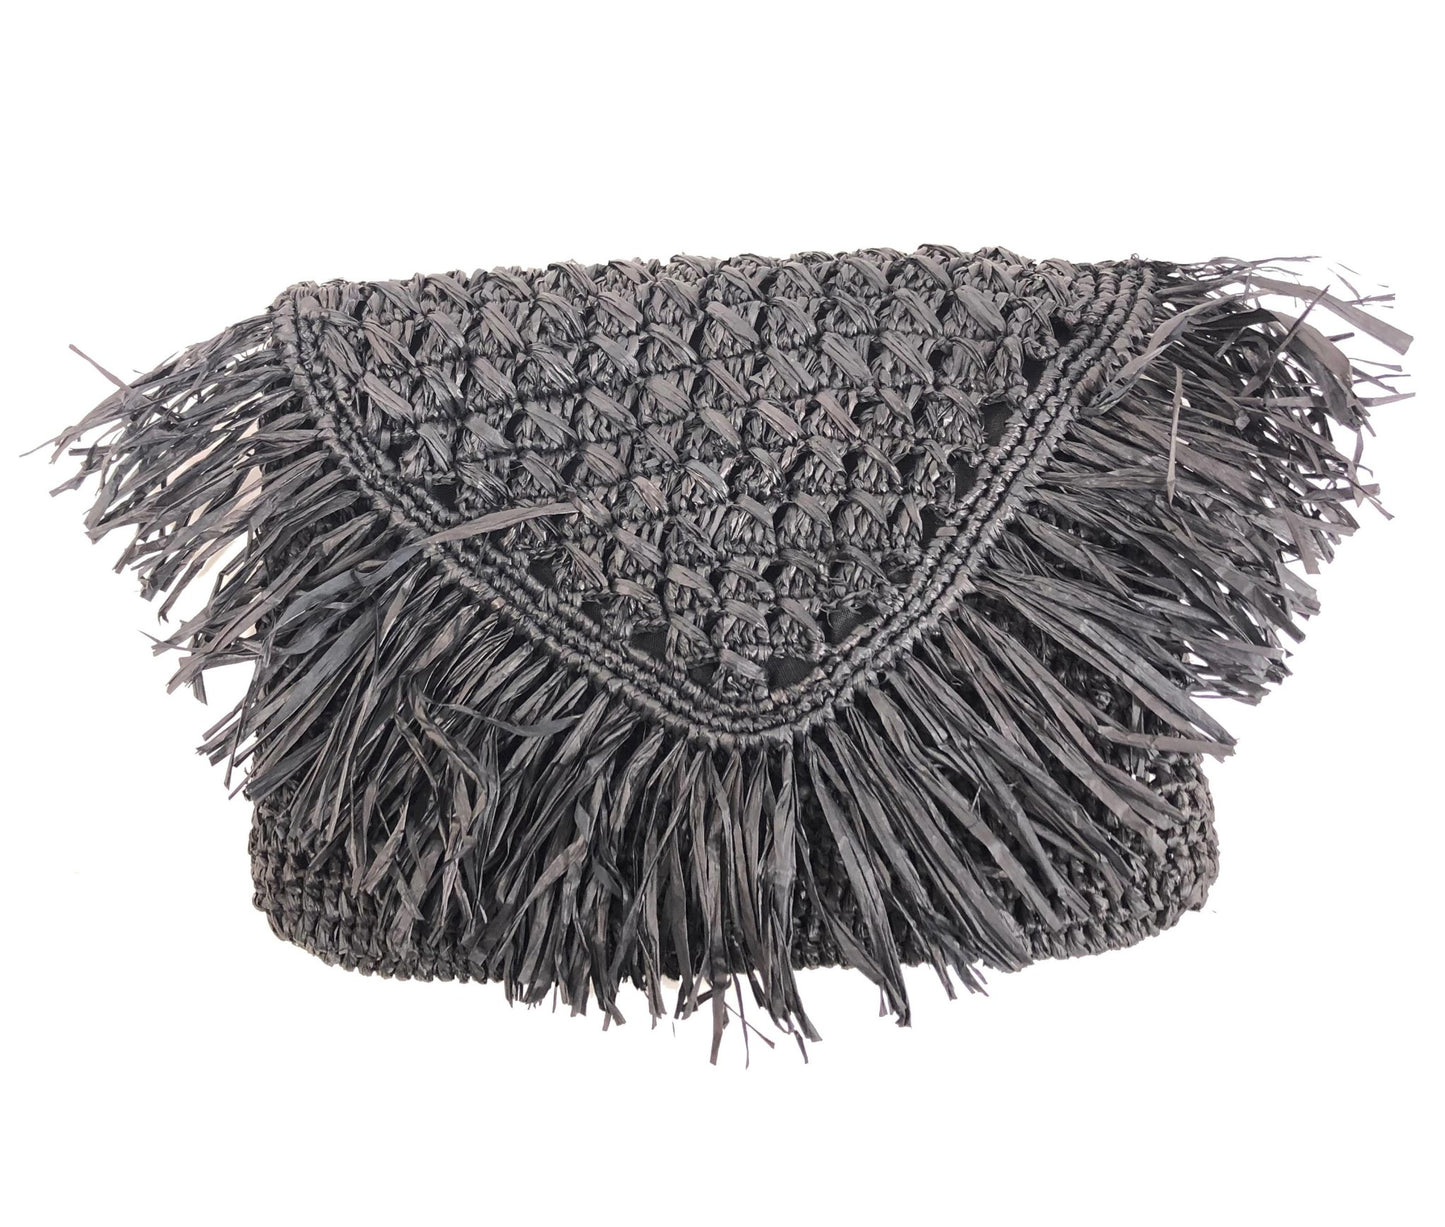 Shebobo - Low Inventory at Discounted Price Assorted Straw Bags & Hats - Gaines Jewelers